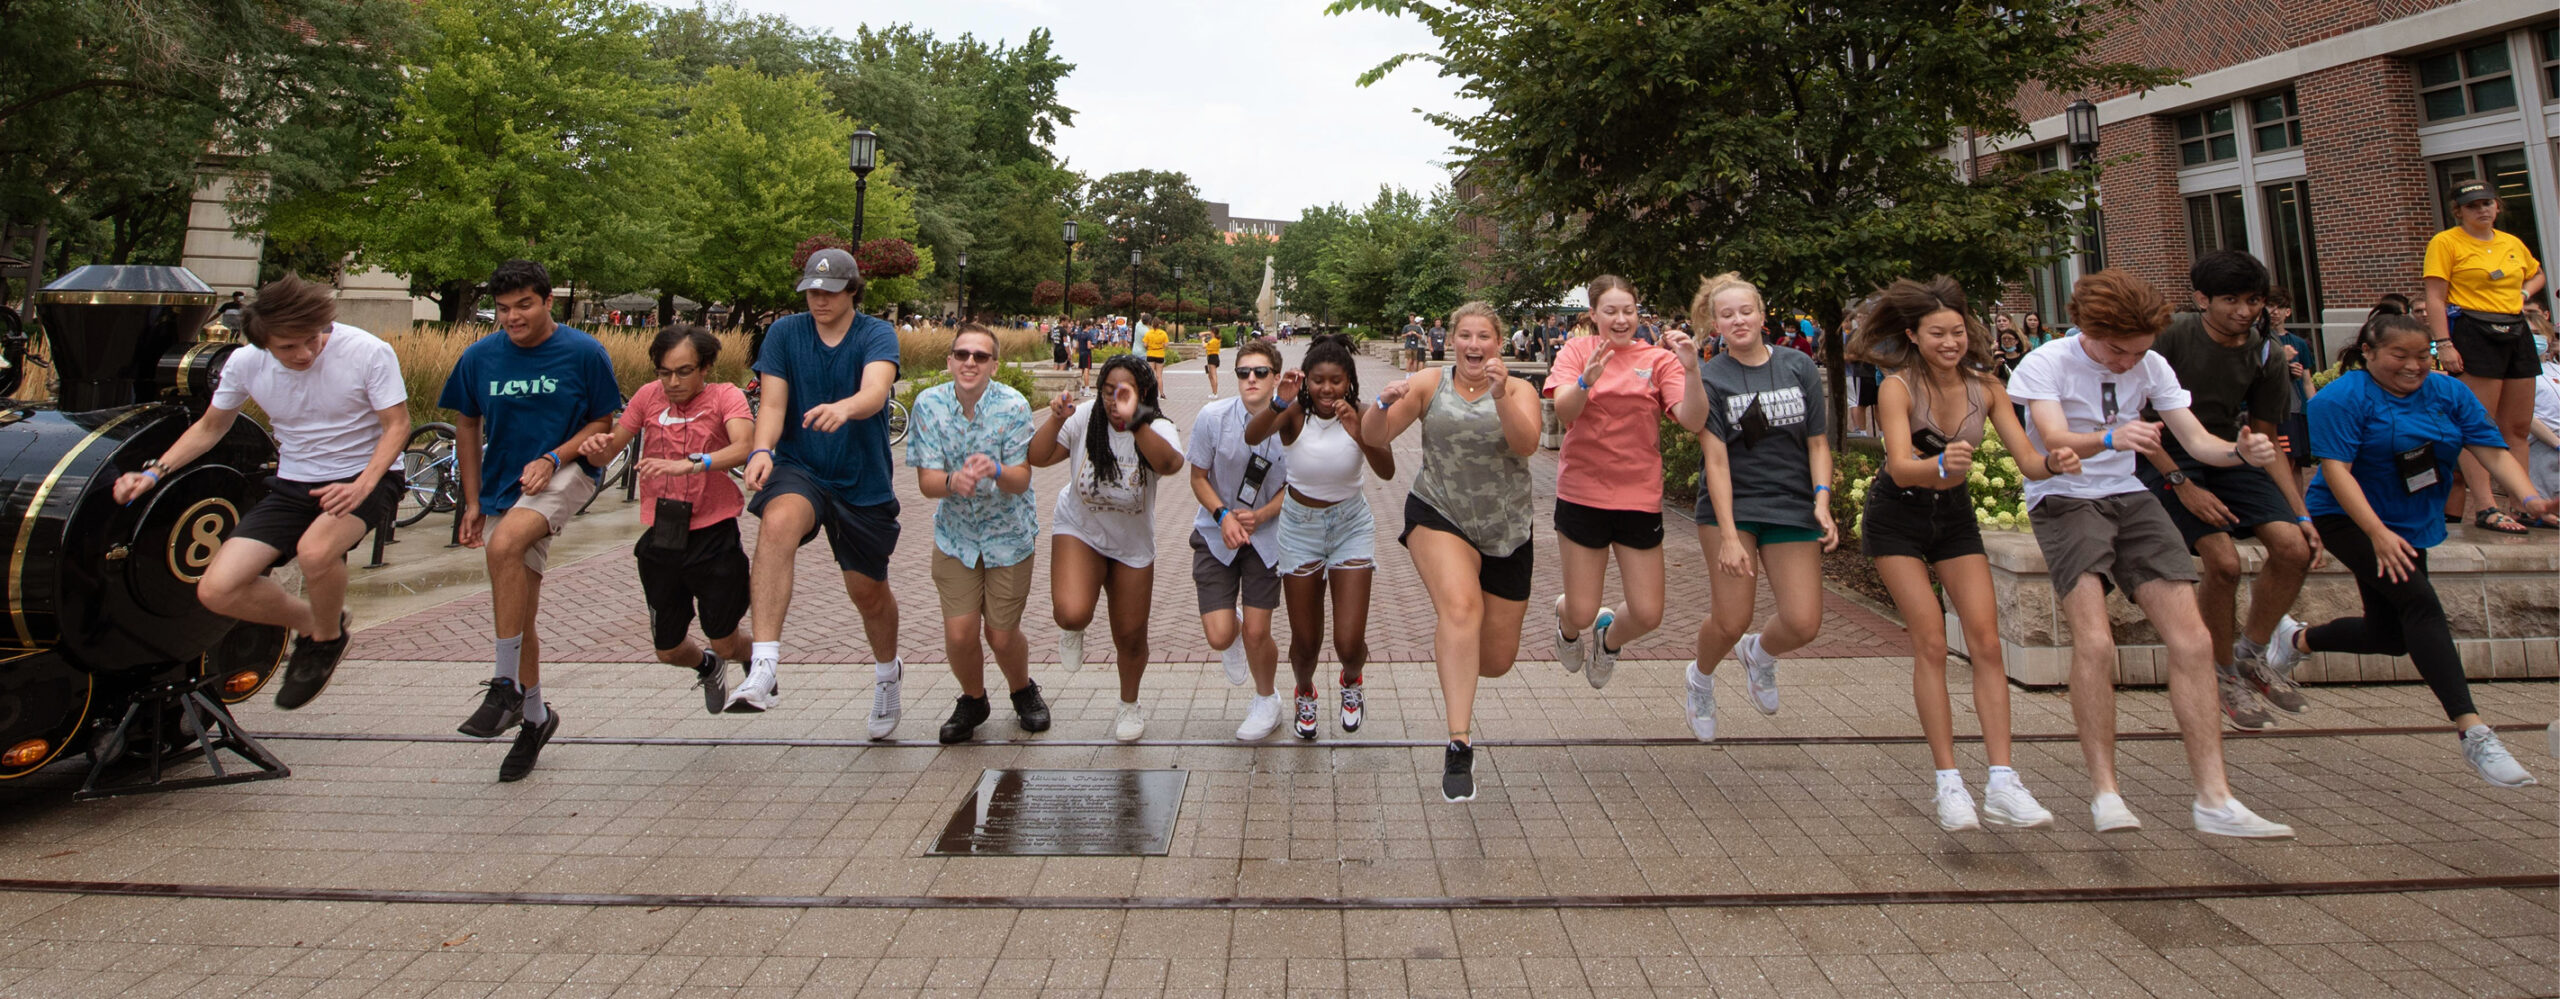 Purdue Mobile ID, Mobile First effort kicks into high gear this week with  Boiler Gold Rush, Boiler Gold Rush International orientation - Purdue  University News